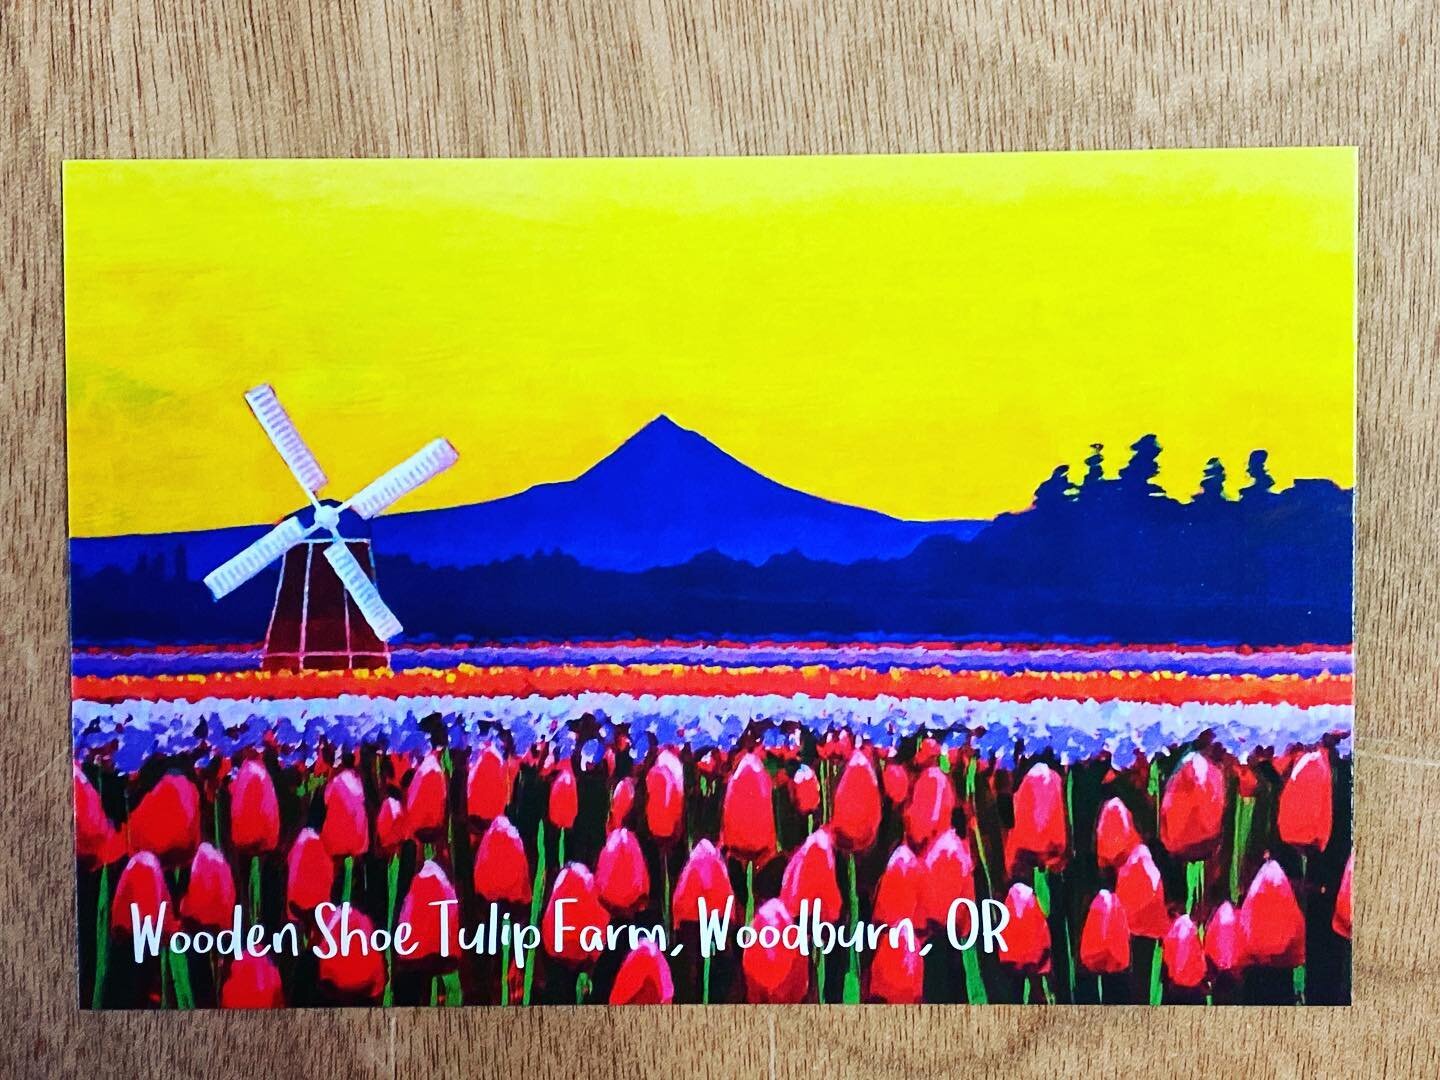 This just arrived! The Wooden Shoe Tulip Farm Festivities are getting closer and closer. Always a favorite place to enjoy the beauty of nature. ❤️🌷#thewoodenshoetulipfarm #iambibby #tulips #pnw #artistofinstagram